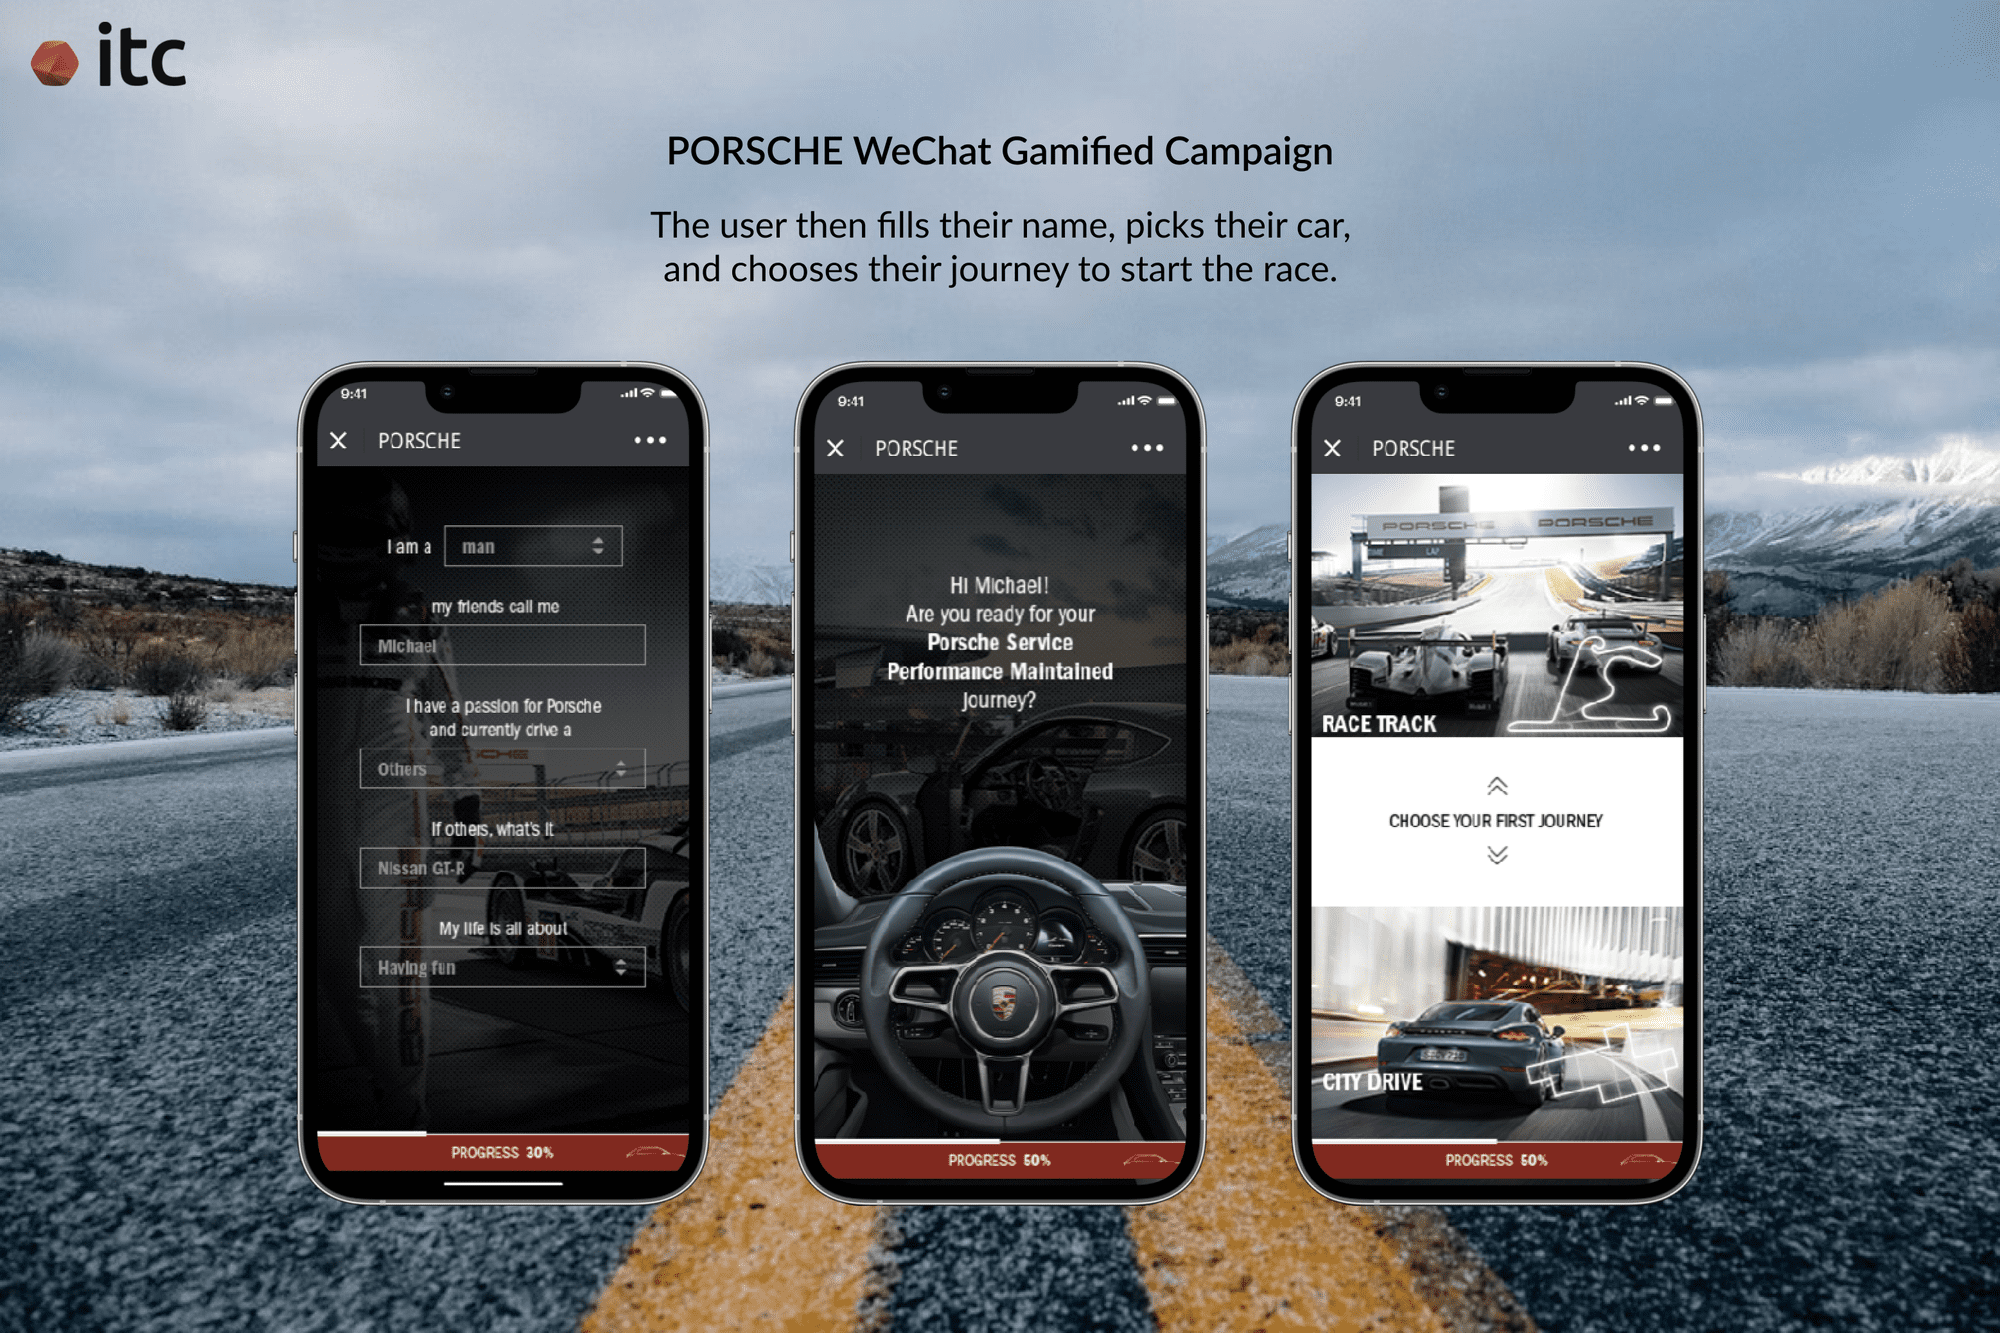 The player can pick their Porsche car and choose their racing journey in the Porsche WeChat game